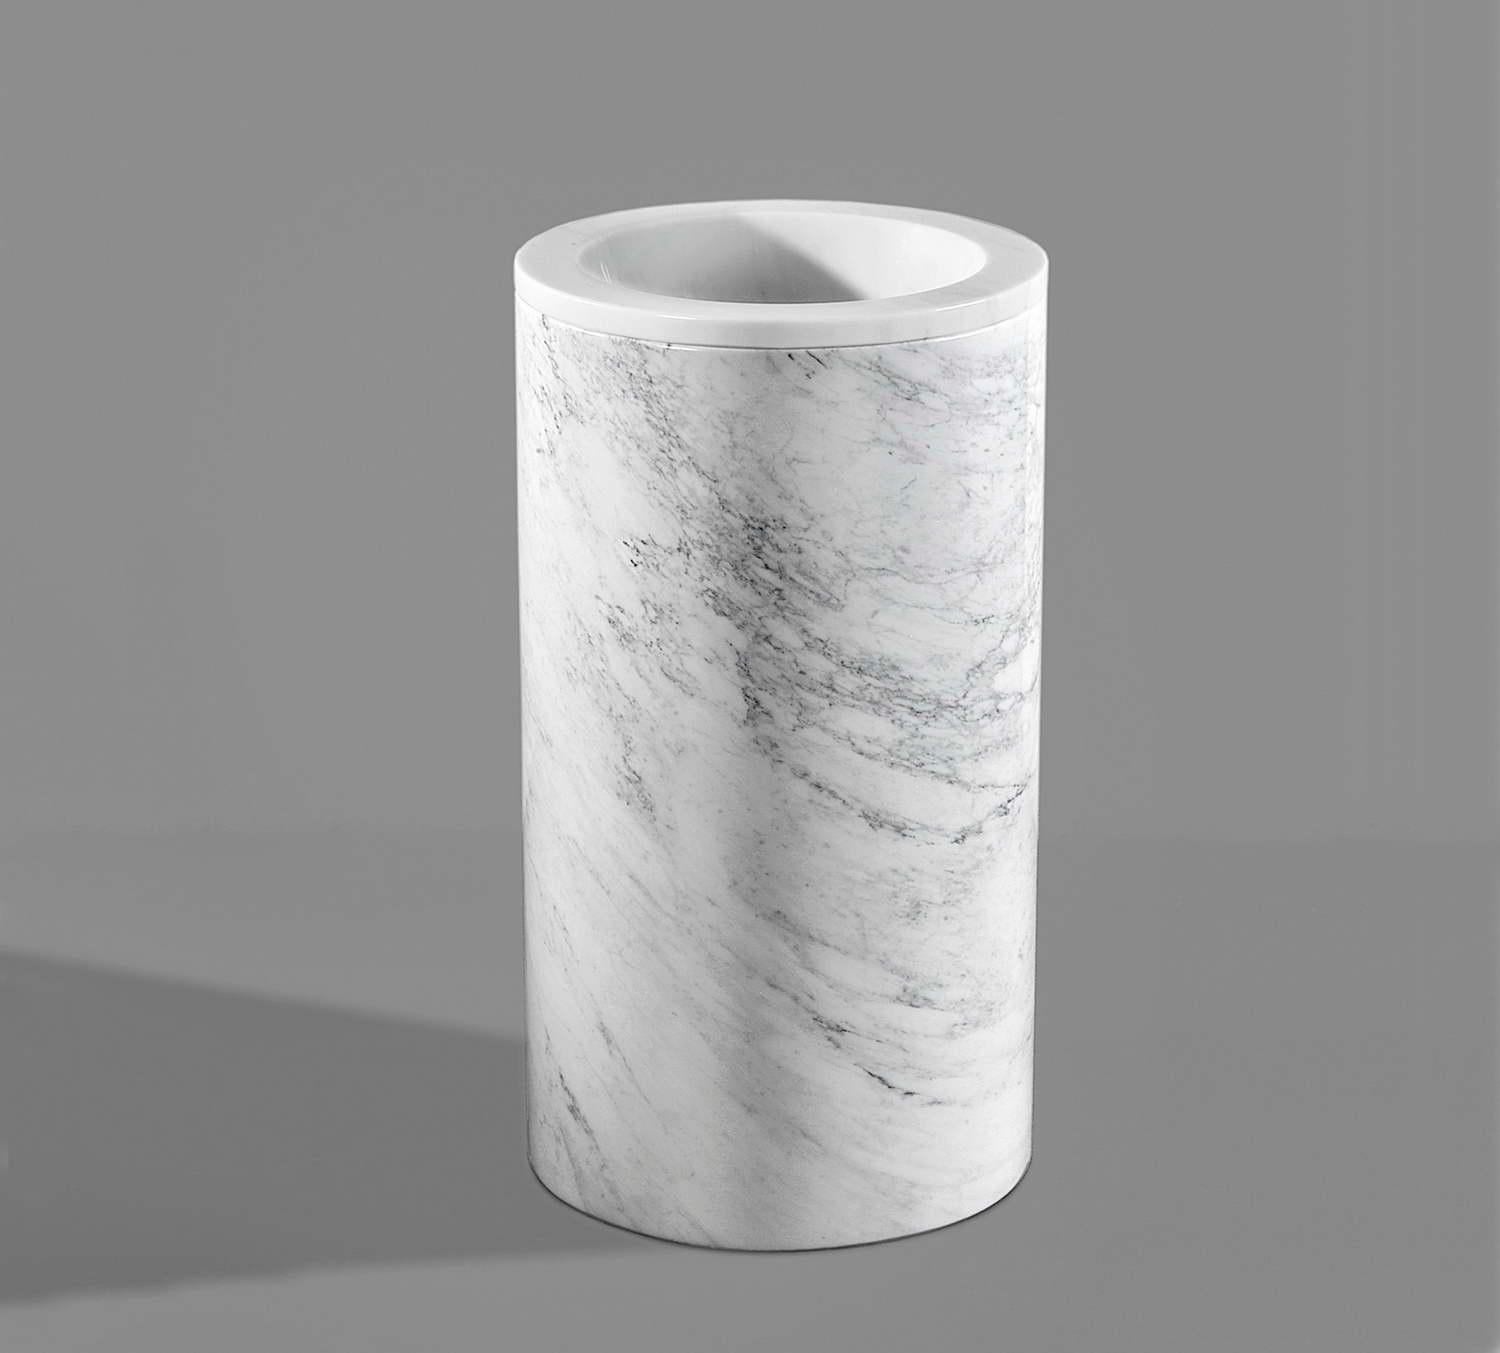 Column washbasin in marble and shelves and mirror designed by Danilo Silvestrin.

Column washbasin with shelves and mirror.
Size: cm. 133 x 42 x 210 H.
Materials: Bianco Carrara & Nero Marquina
Designed by: Danilo Silvestrin.